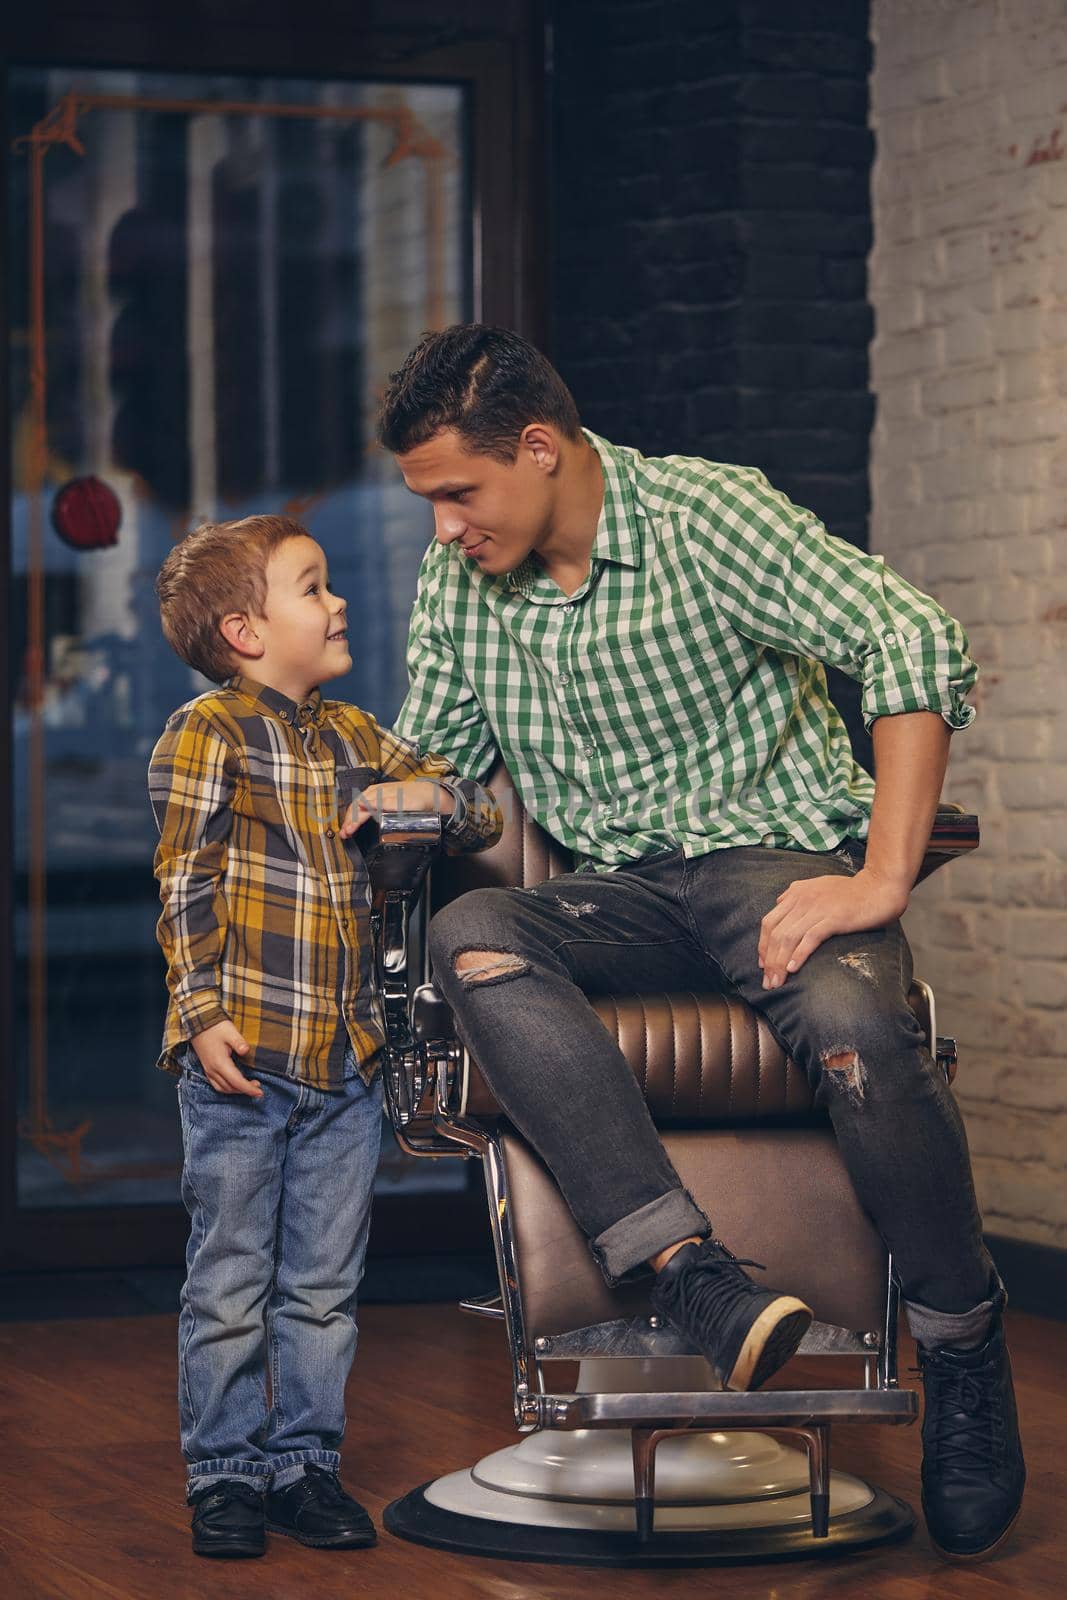 Young handsome father and his little stylish son at barbershop waiting for barber. The father is sitting in the chair and the son is standing nearby